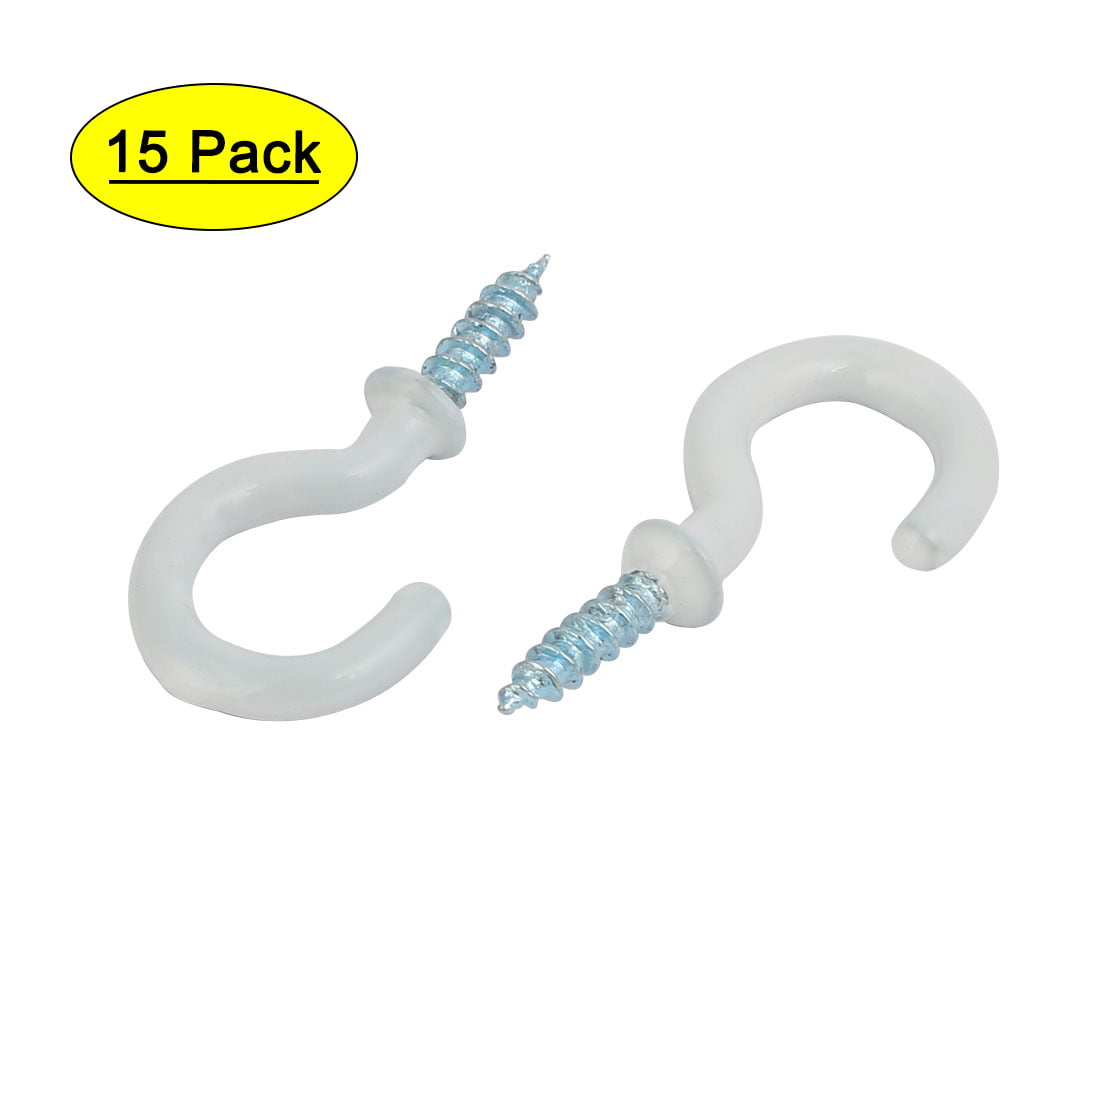 Merriway BH04764 Cup Hook White Plastic Coated 25 mm Set of 6 Pieces Pack of 6